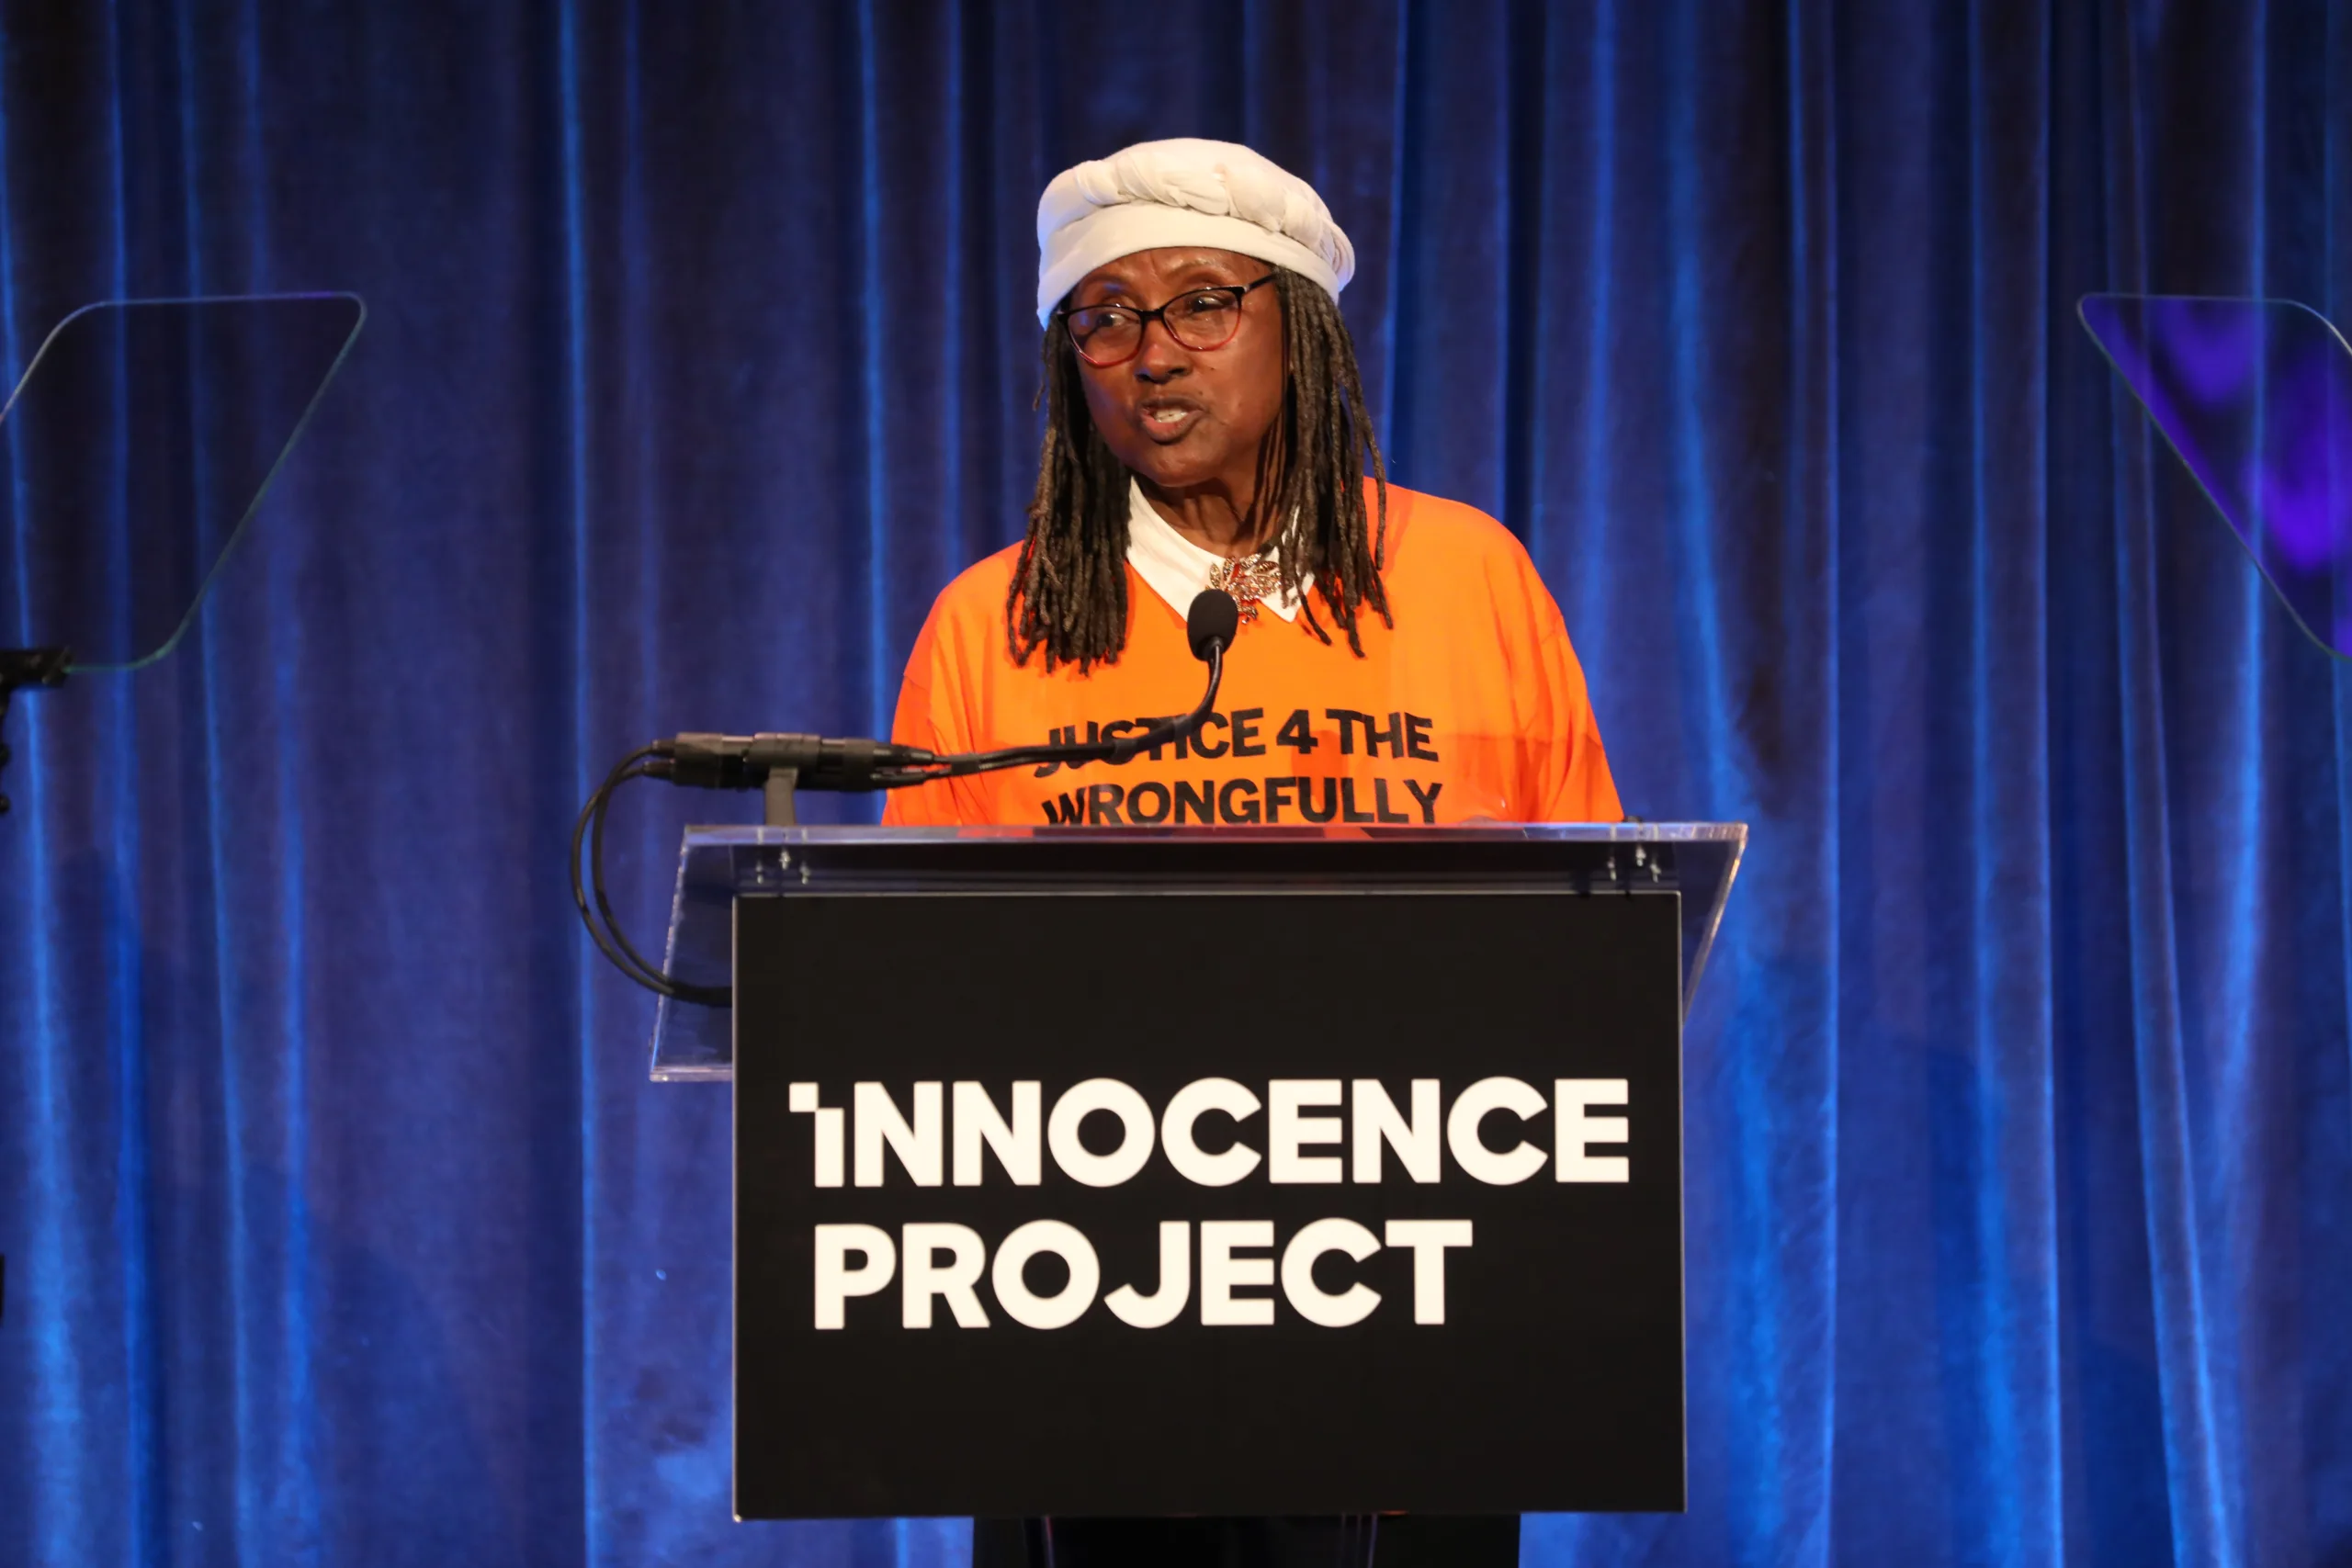 Sharonne Salaam accepts the Freedom and Justice award. (Image: Matthew Adam Photography)